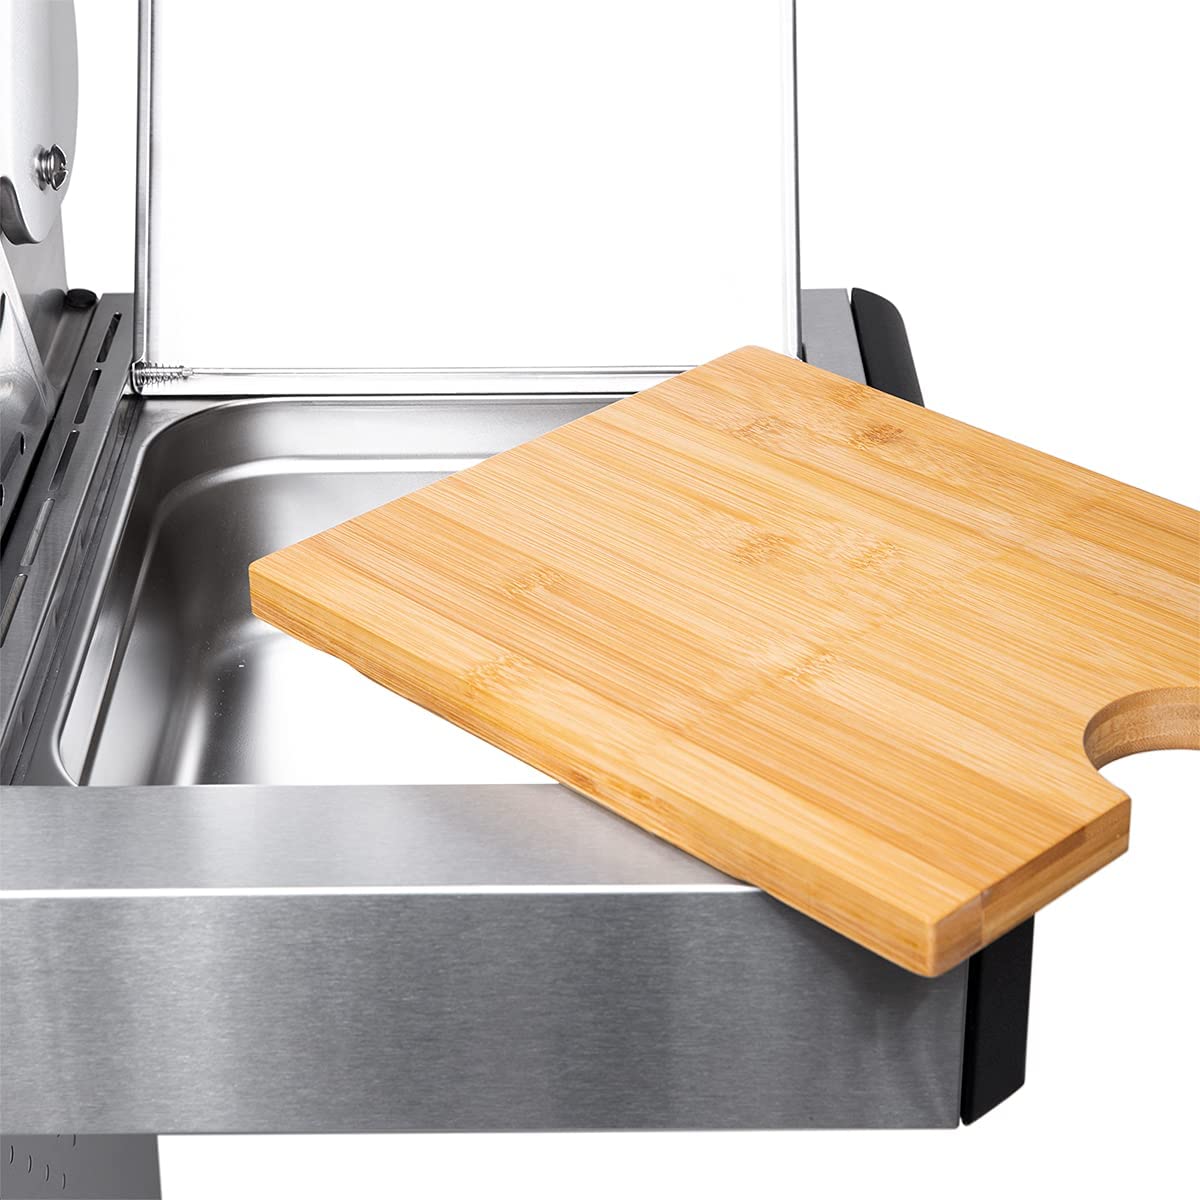 Side Table with Bamboo Cutting Board and Storage - CosmoGrill